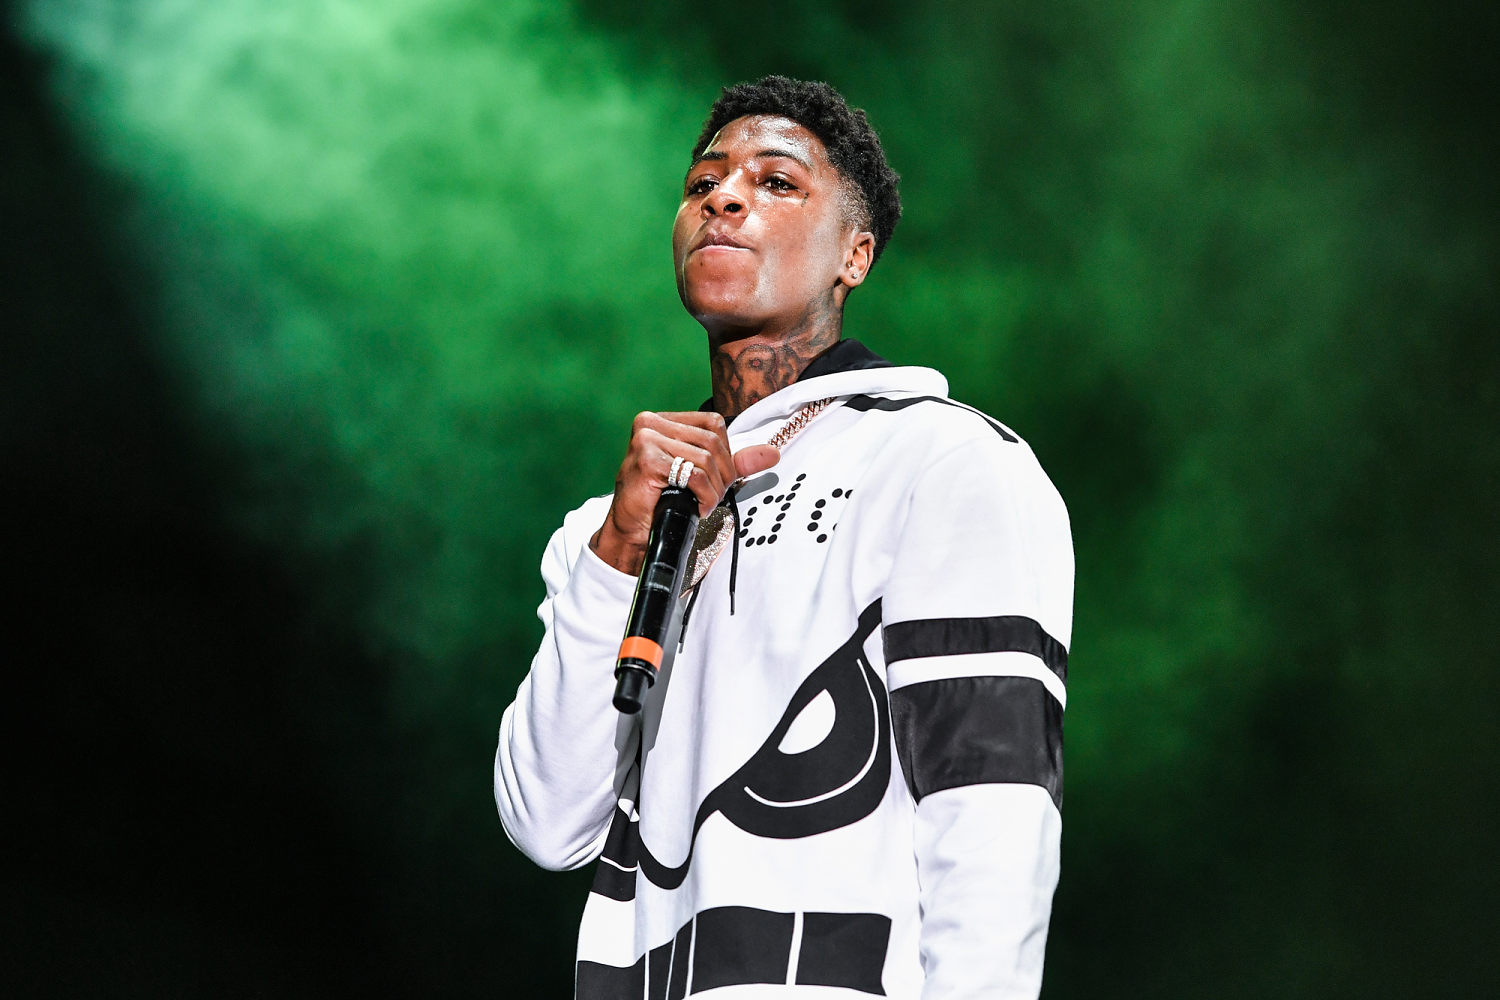 NBA YoungBoy arrested in Utah on weapon and drug charges